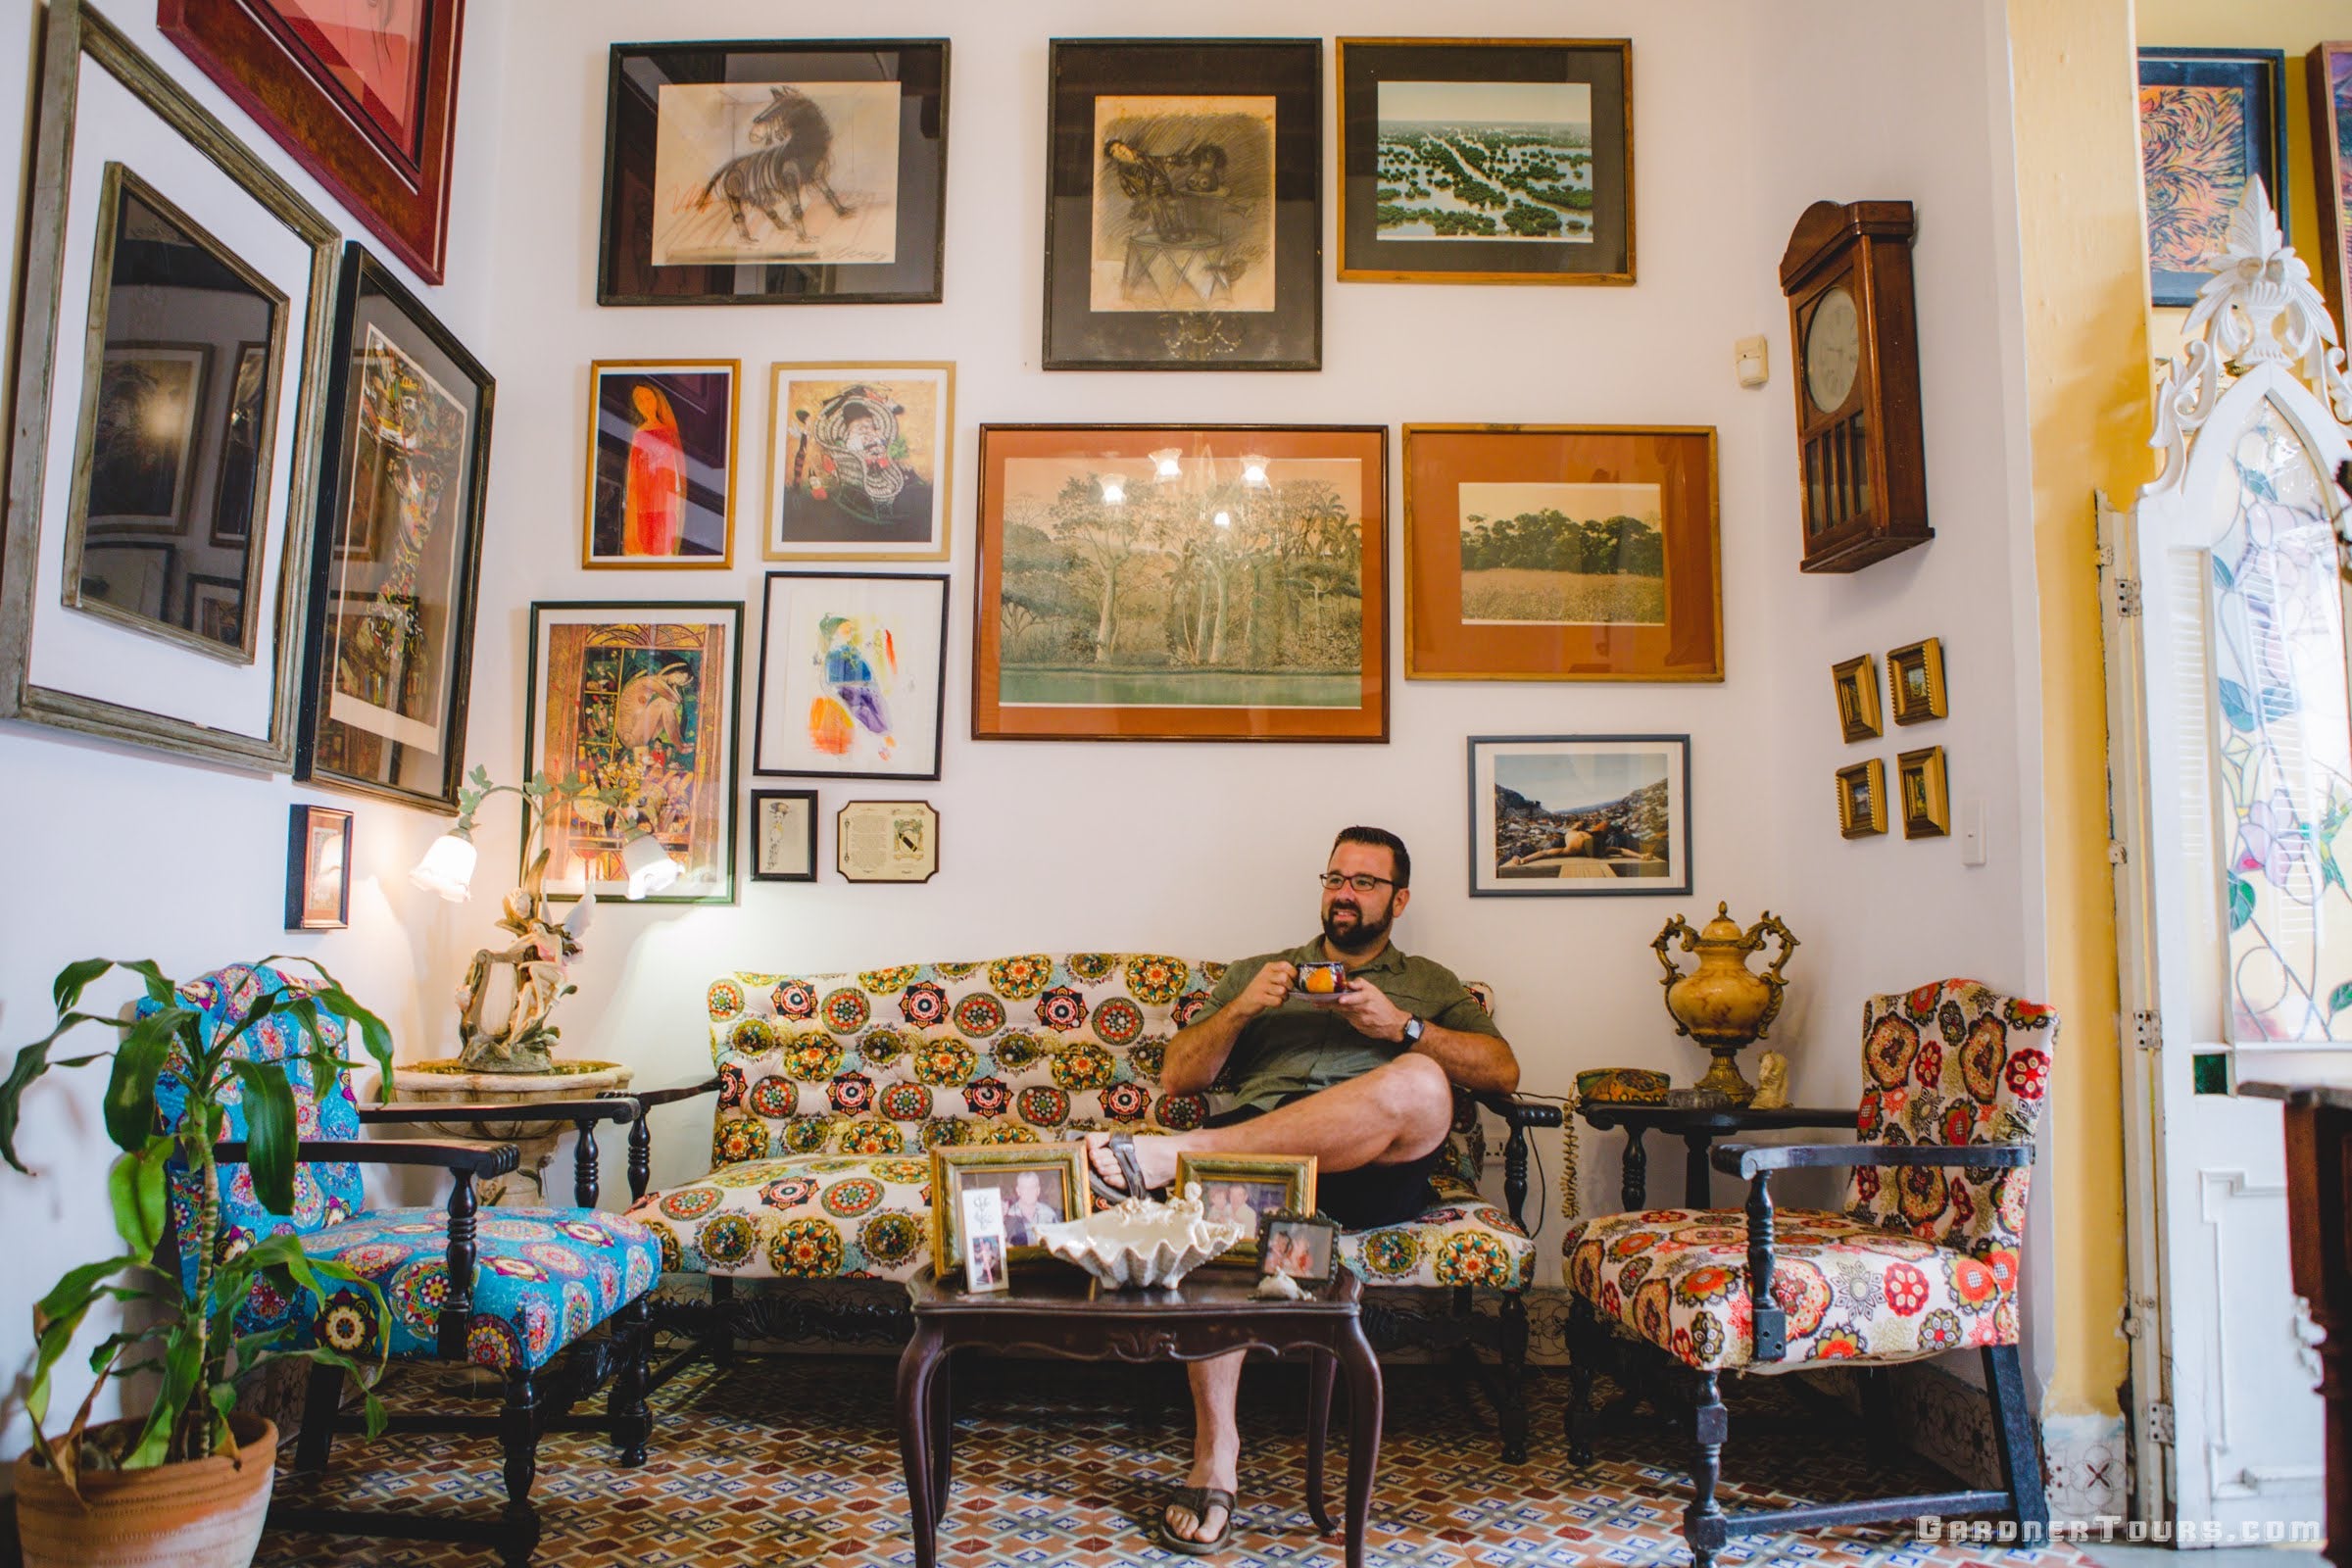 Gardner Tours Owner and Tour Guide Colby Gardner drinking coffee as he sits in a Colorful Living Room with Paintings and Tiled Floors at a Private BnB in Havana, Cuba